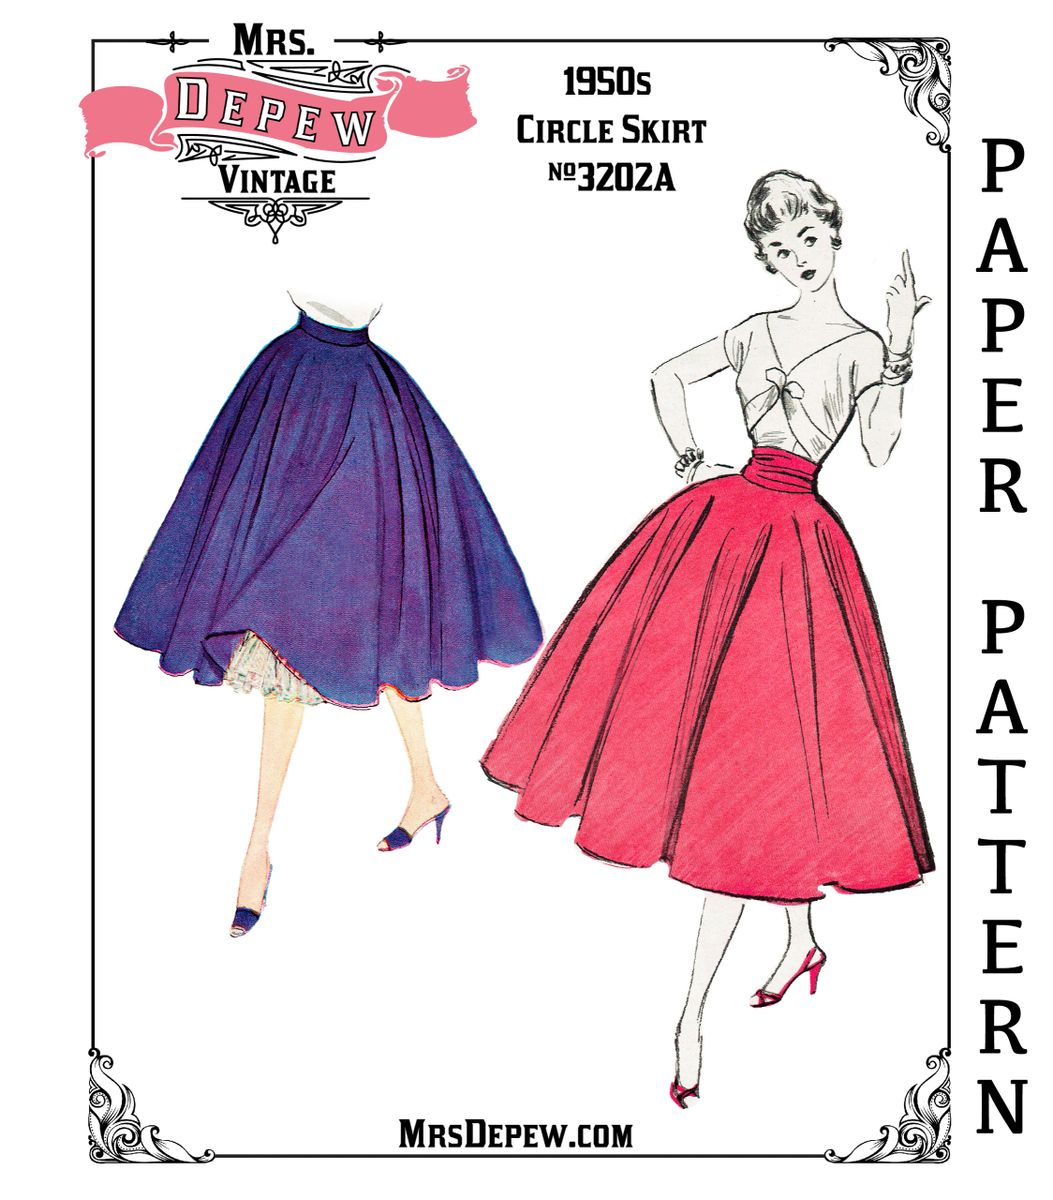 D-A-H Vintage Sewing Pattern 1940s Corselette Garter Belt in Any